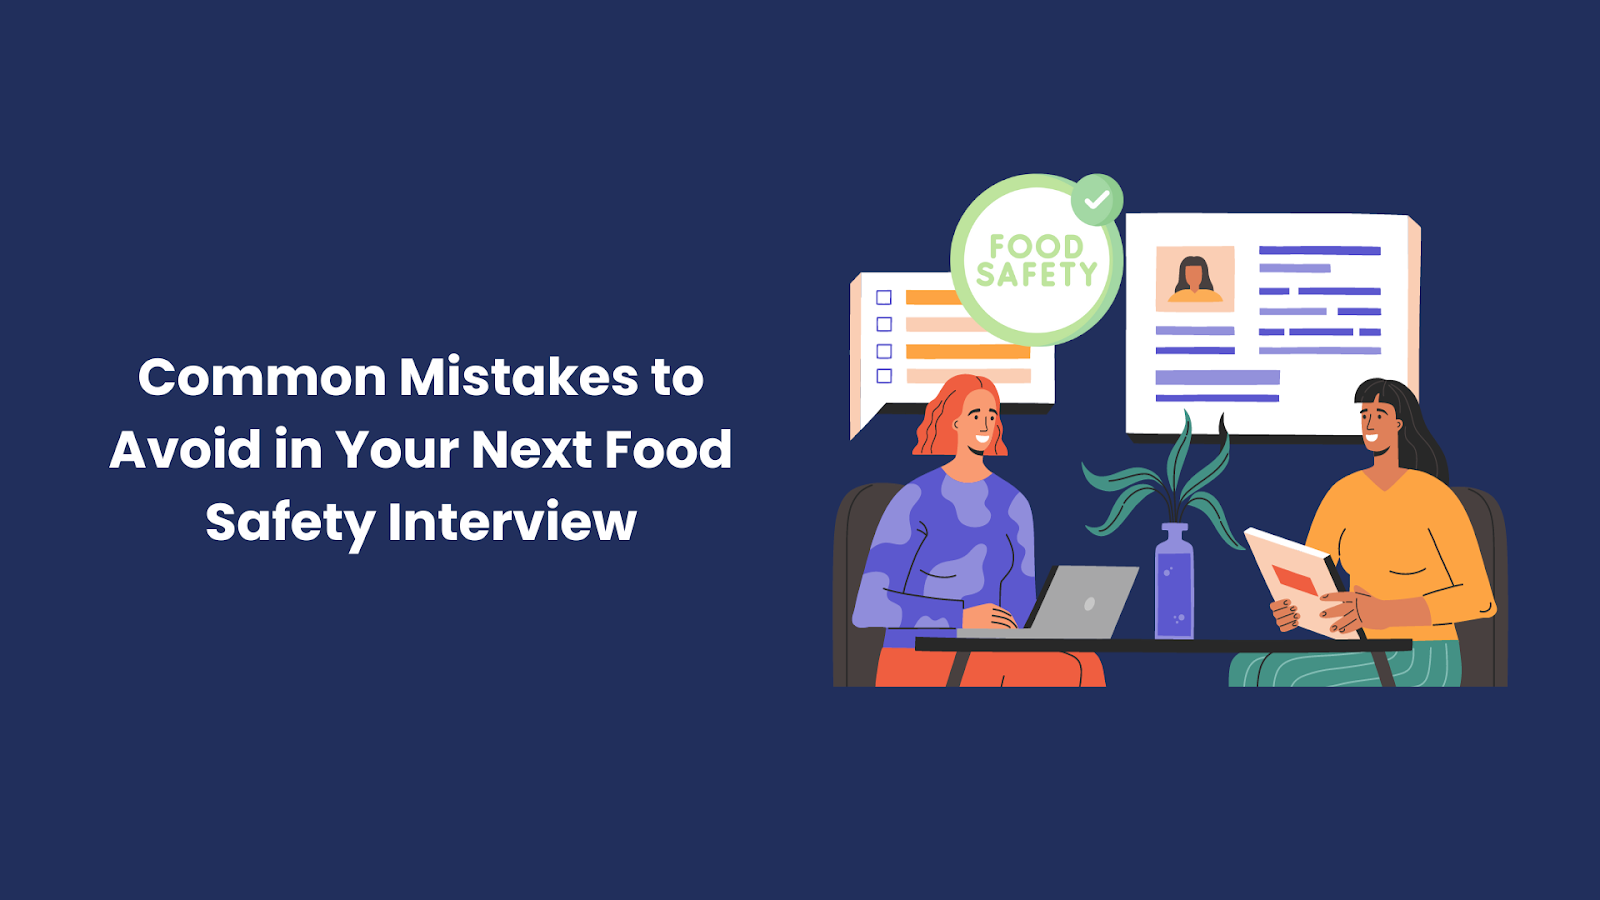 Common Mistakes to Avoid in Your Next Food Safety Interview